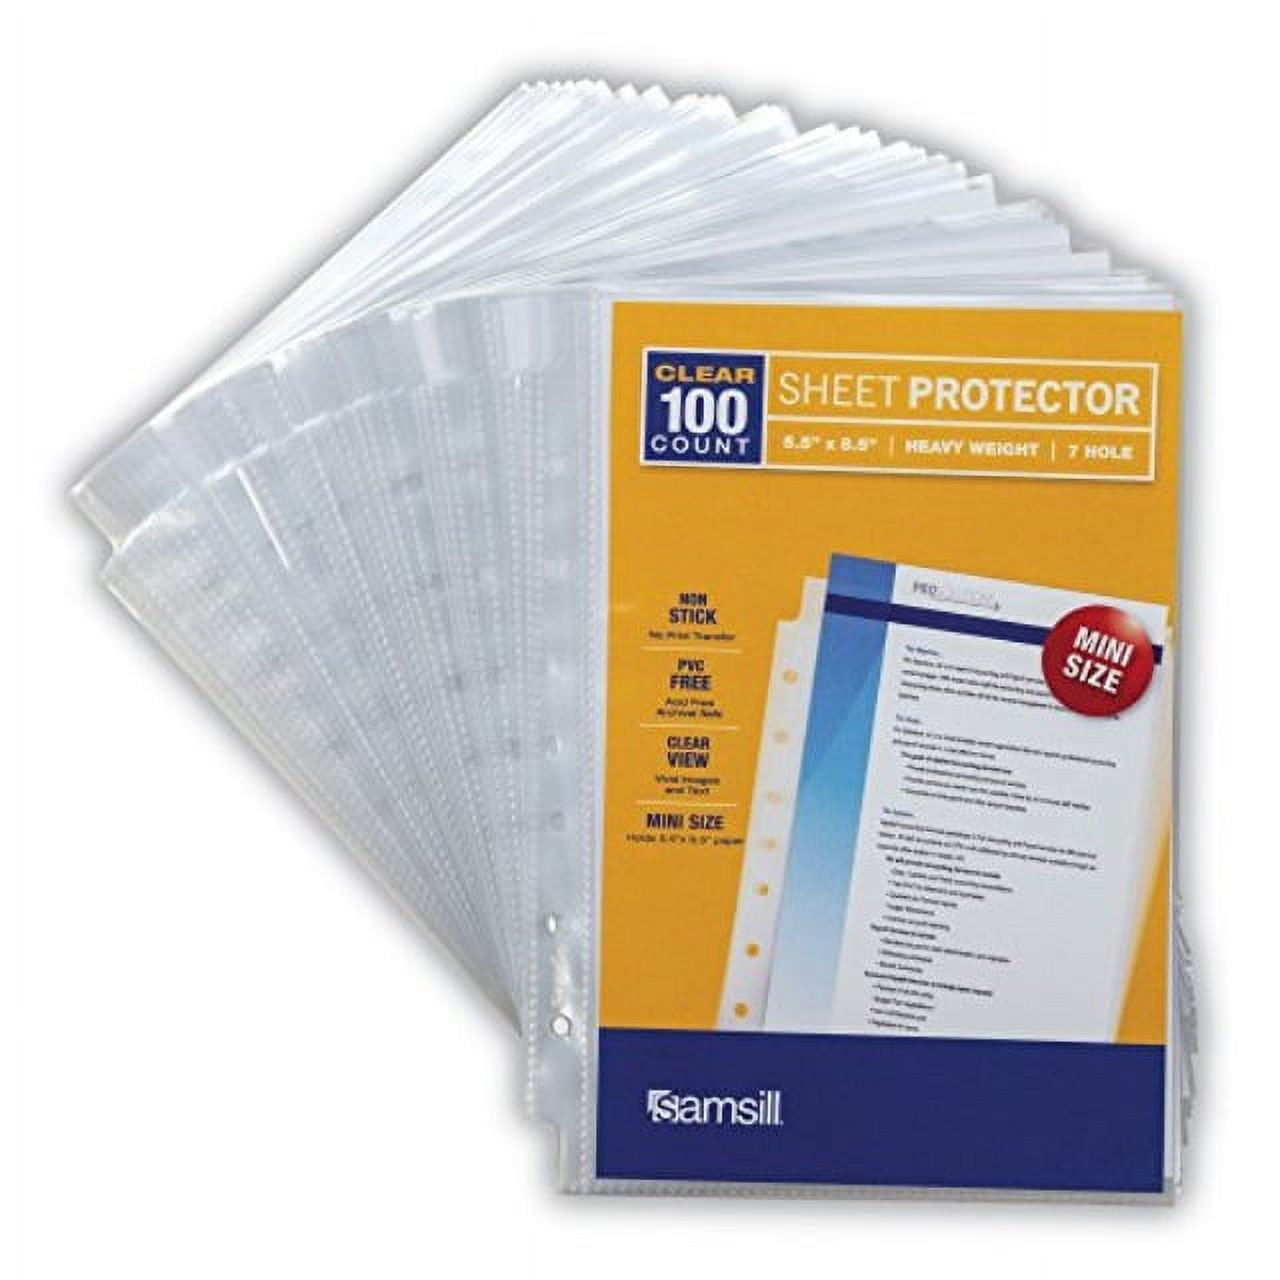 Heavyweight Clear Mini Sheet Protectors, 5.5 x 8.5, 50 Pack, Top Load,Reinforced Holes, Acid-Free/Archival Safe